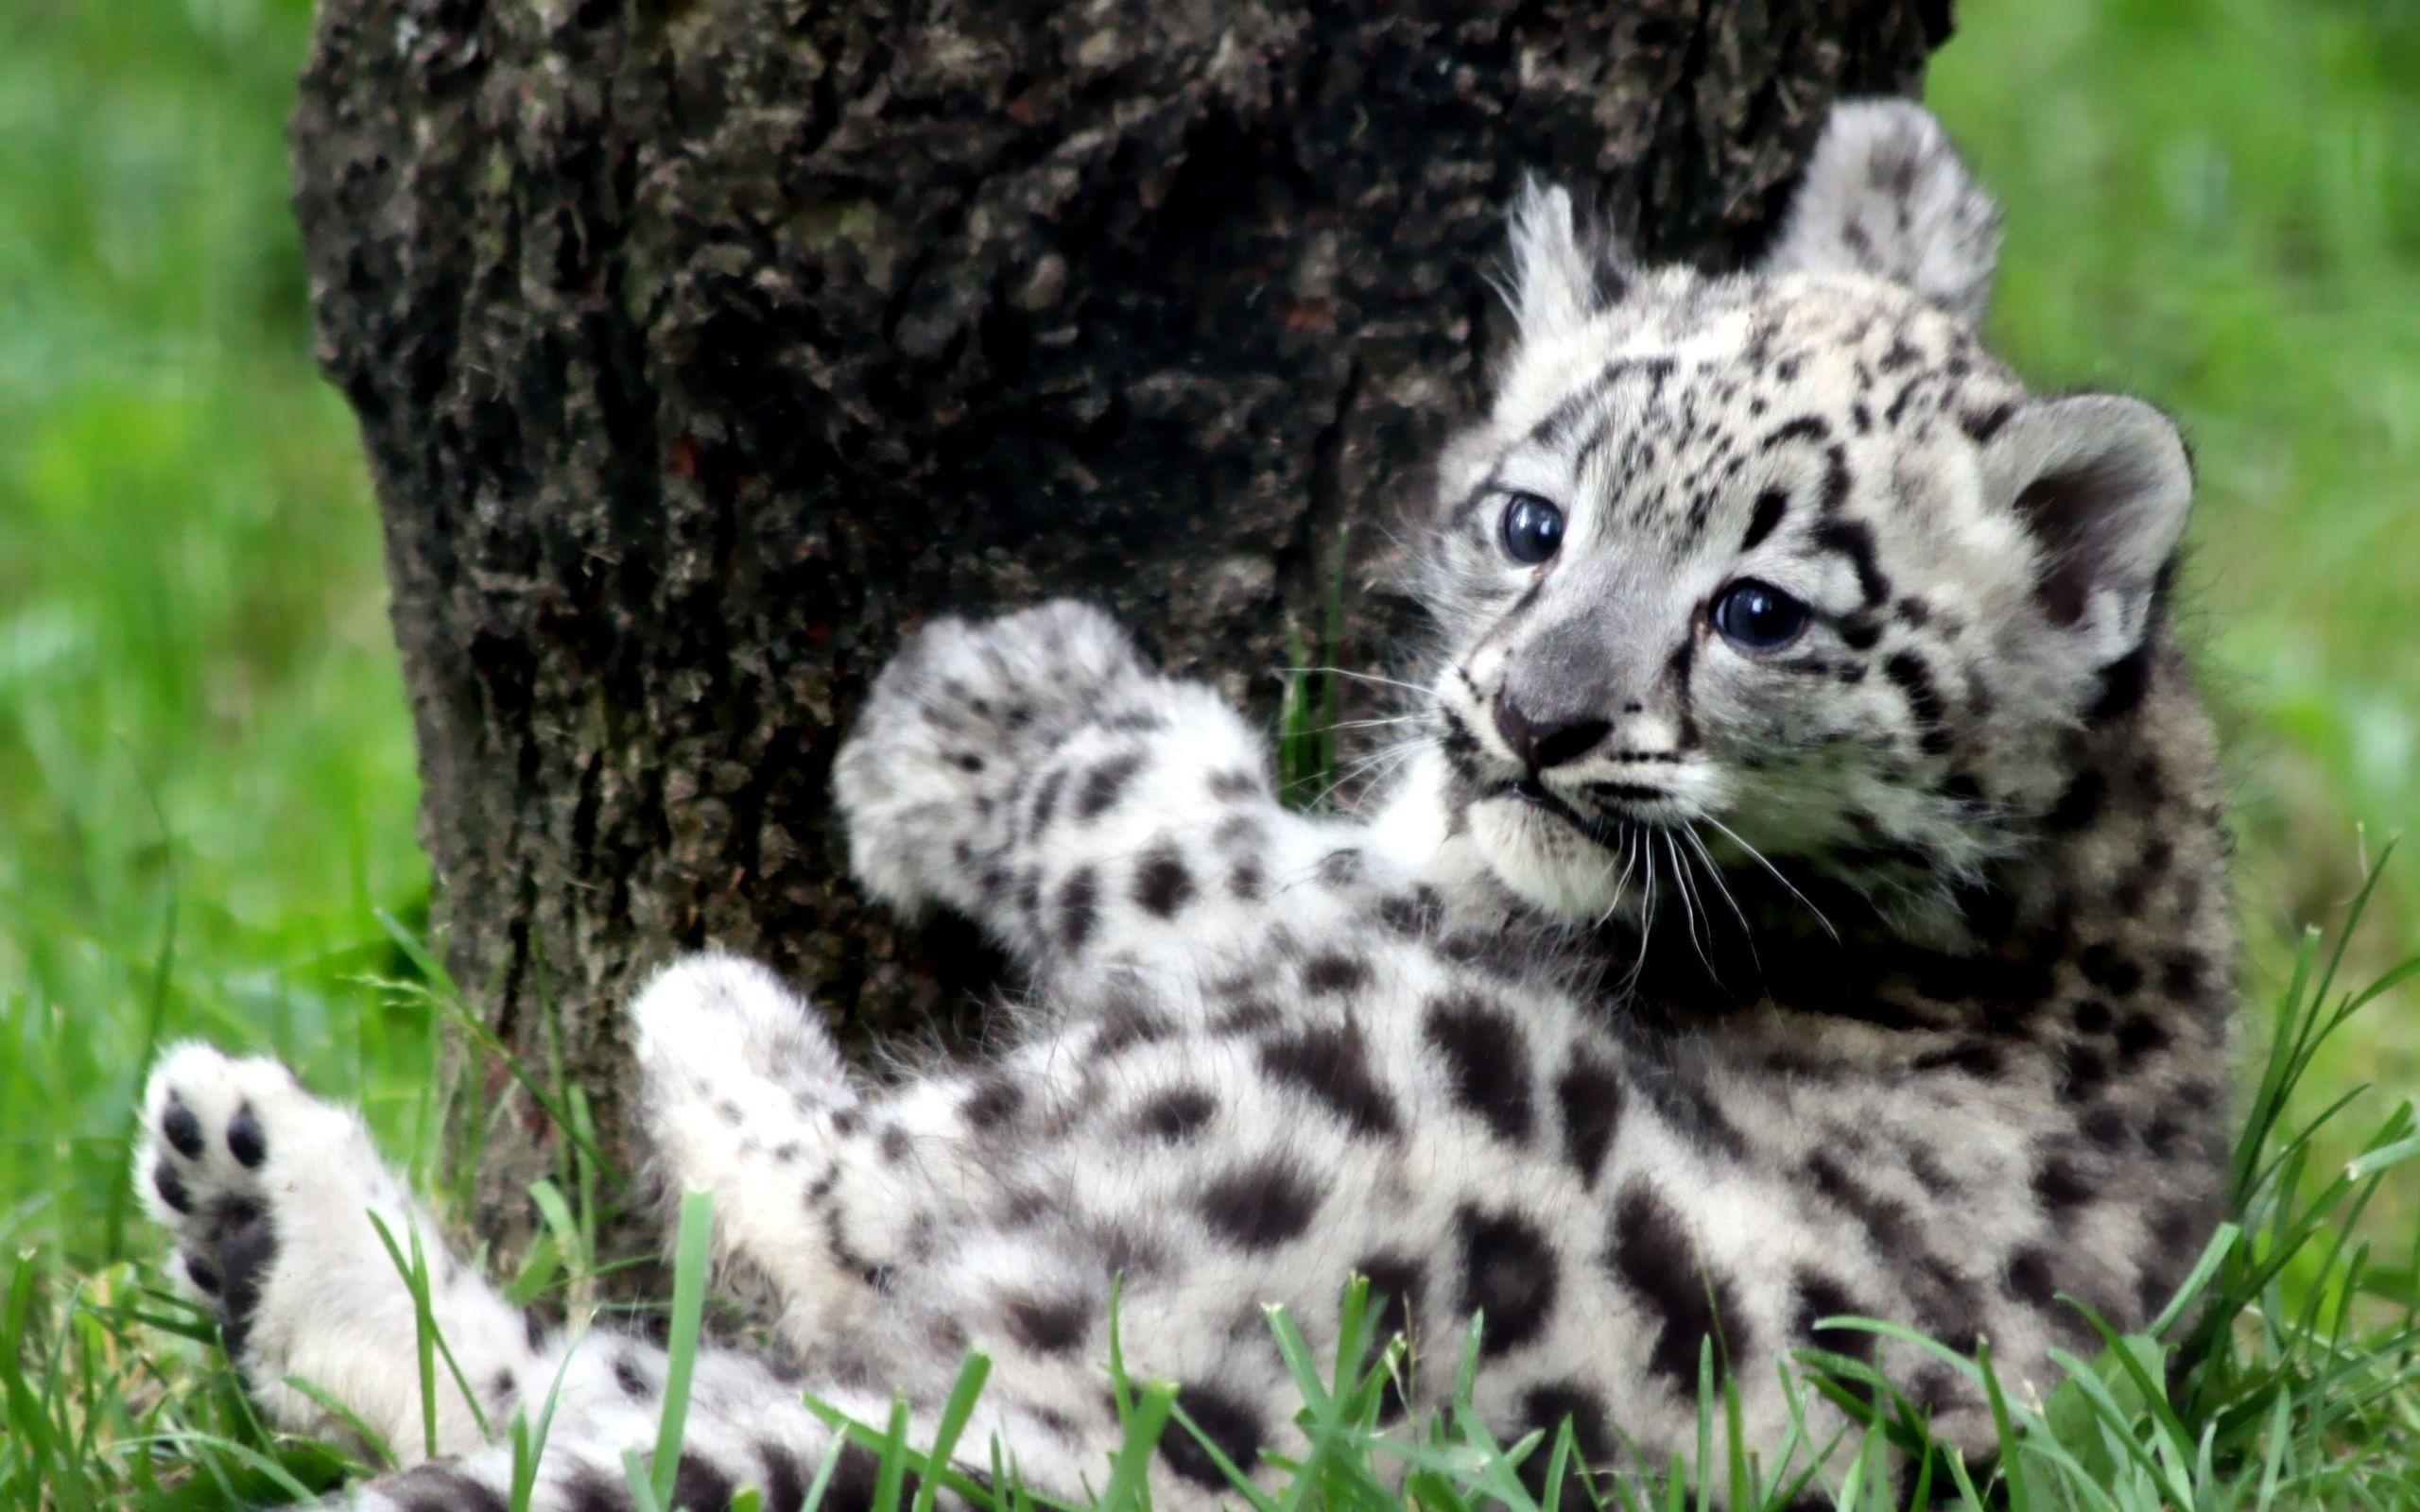 Full HDQ Snow Leopard Picture and Wallpaper Showcase